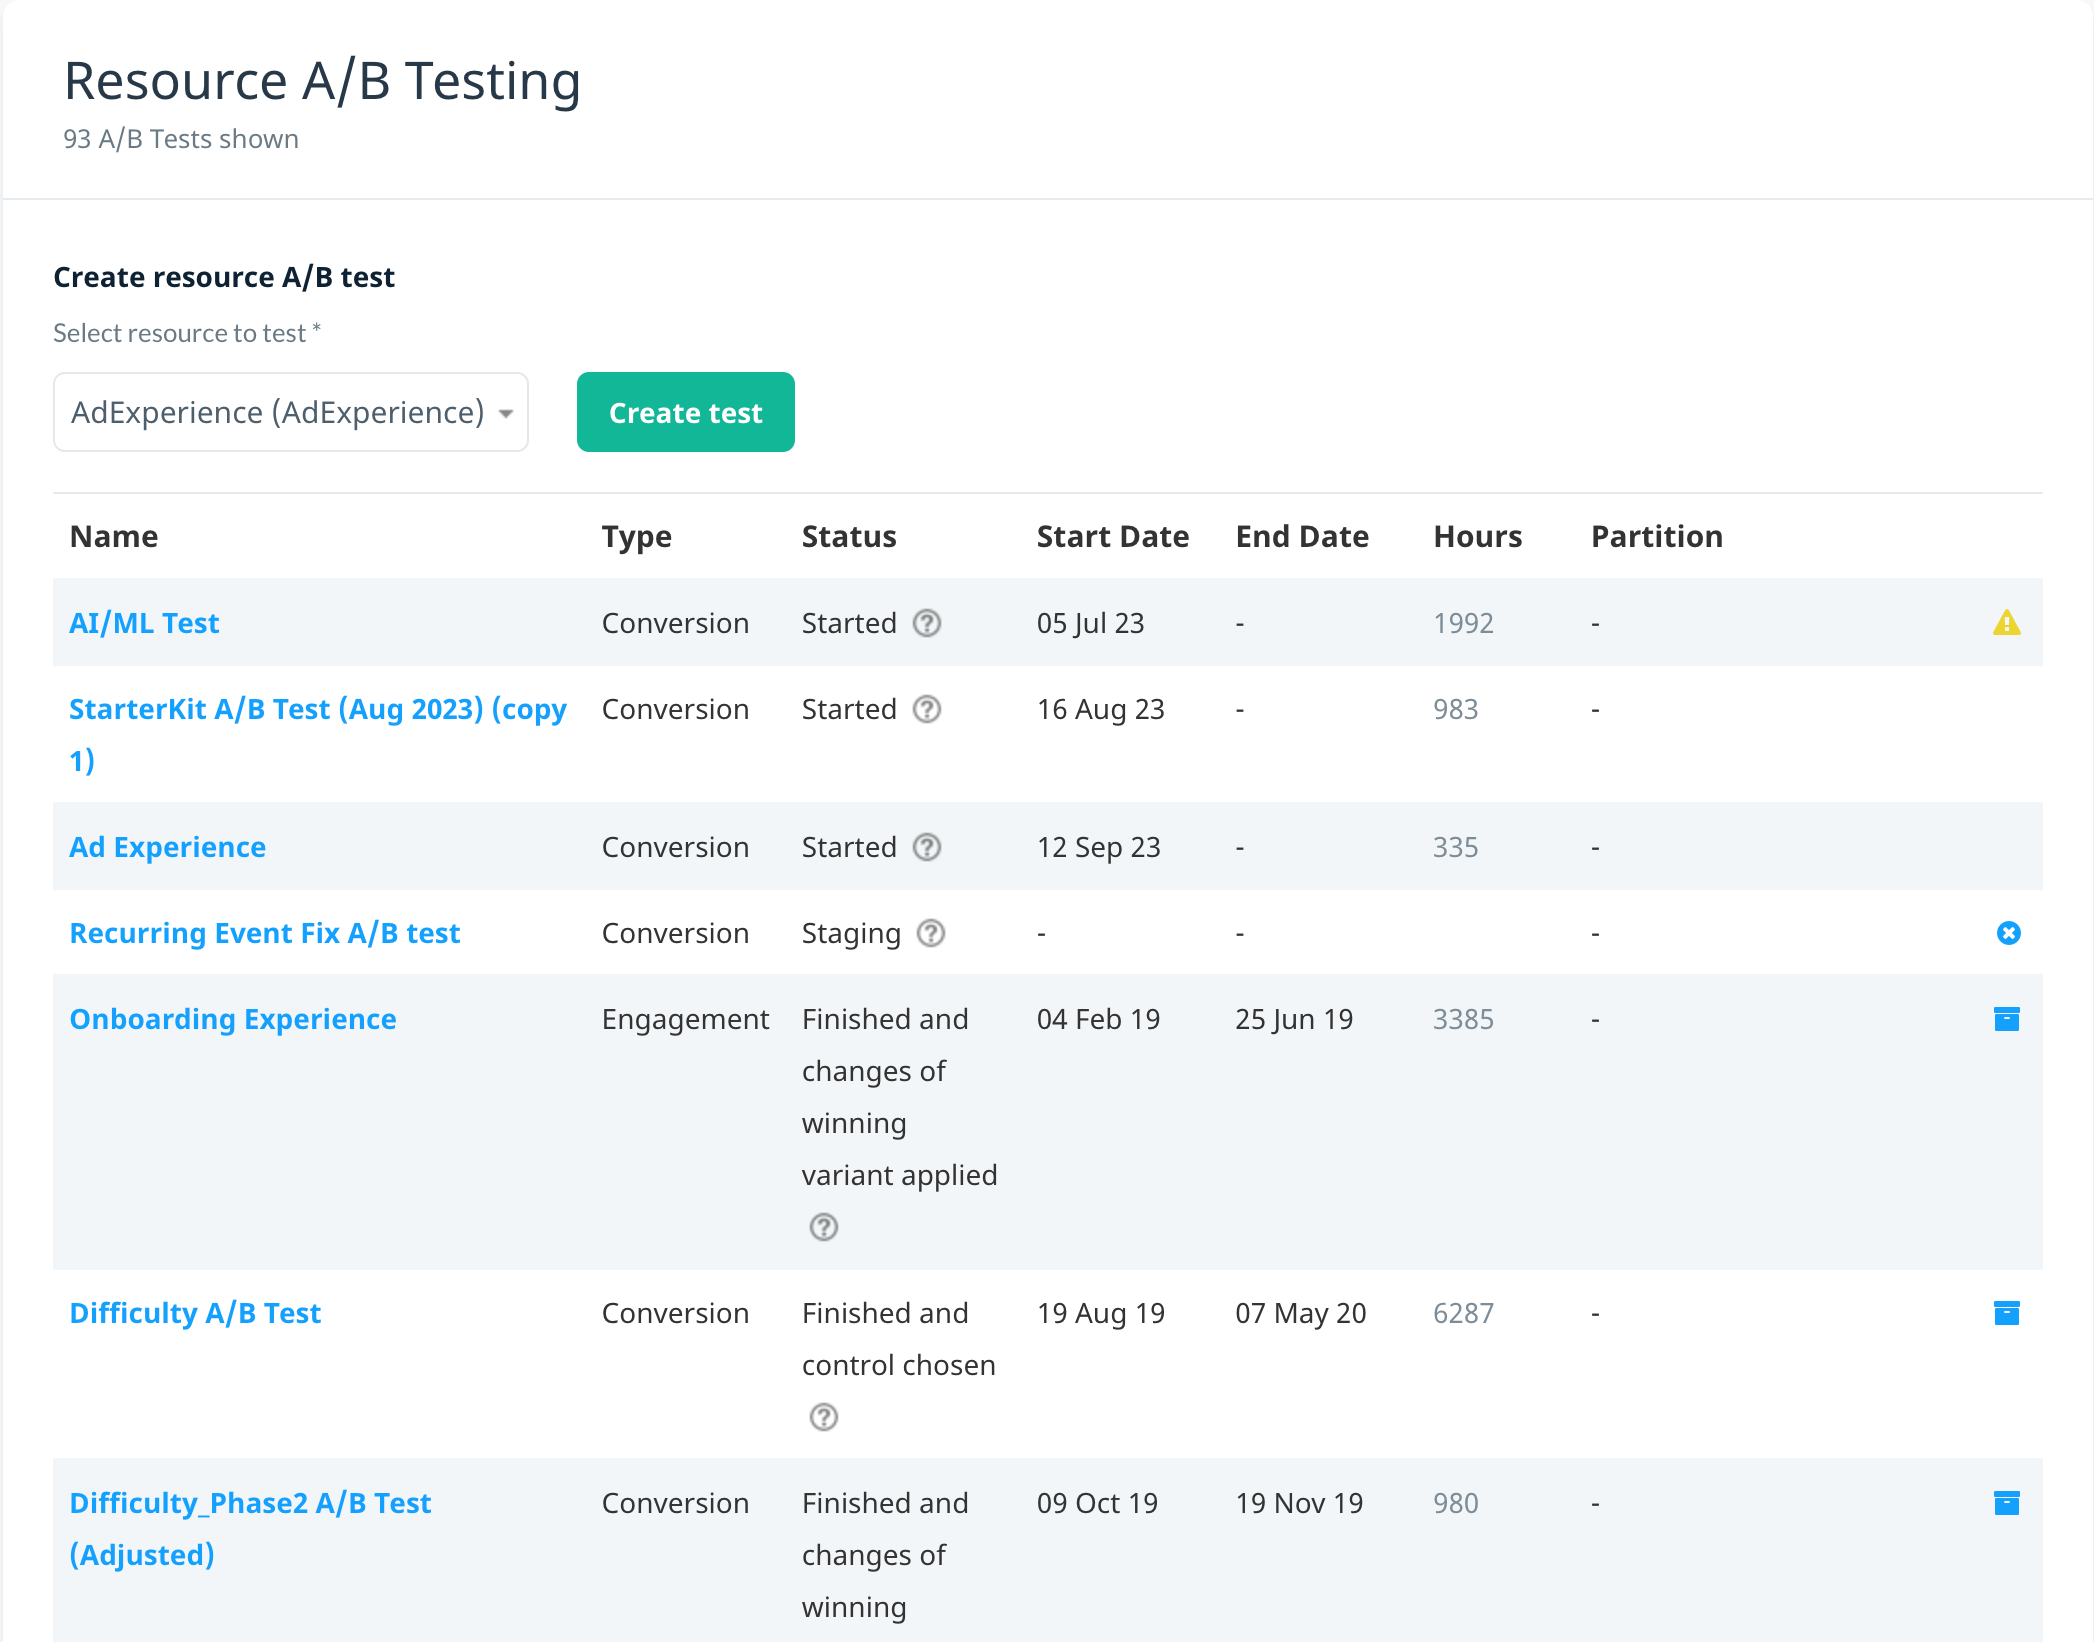 The Resource A/B testing screen displays a table showing your active and finished tests and some high-level test details. Above the table is drop-down list that you can search resources to select for testing. Beside the list is a button labeled Create test.